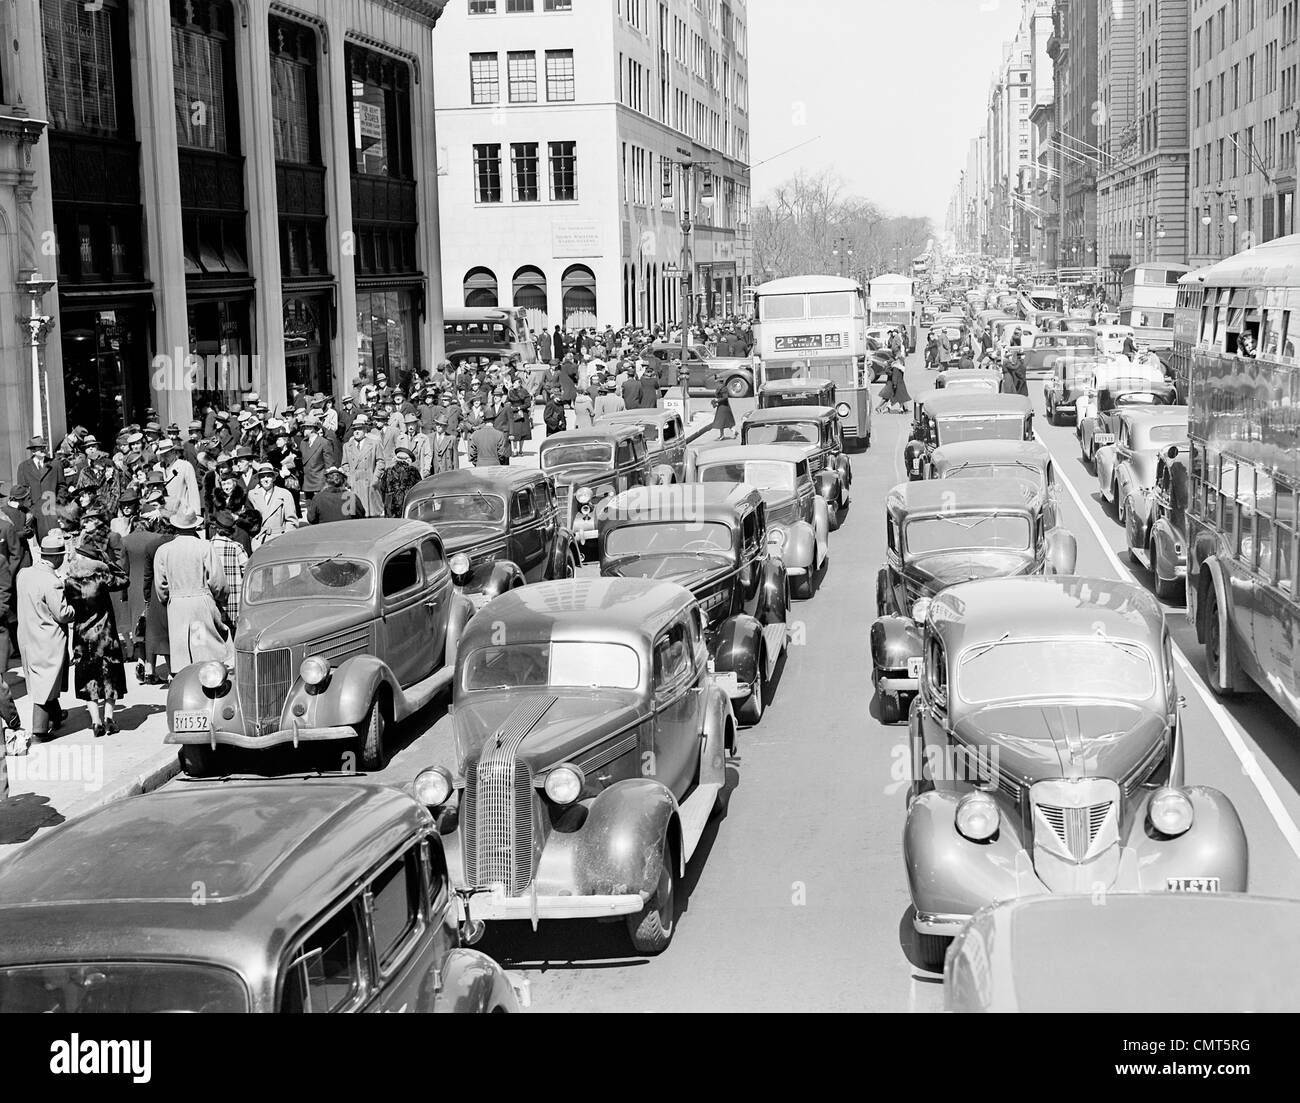 1930s PEDESTRIAN CROWDS AND TRAFFIC ON 5th AVENUE NYC CARS TAXIS BUSES ...